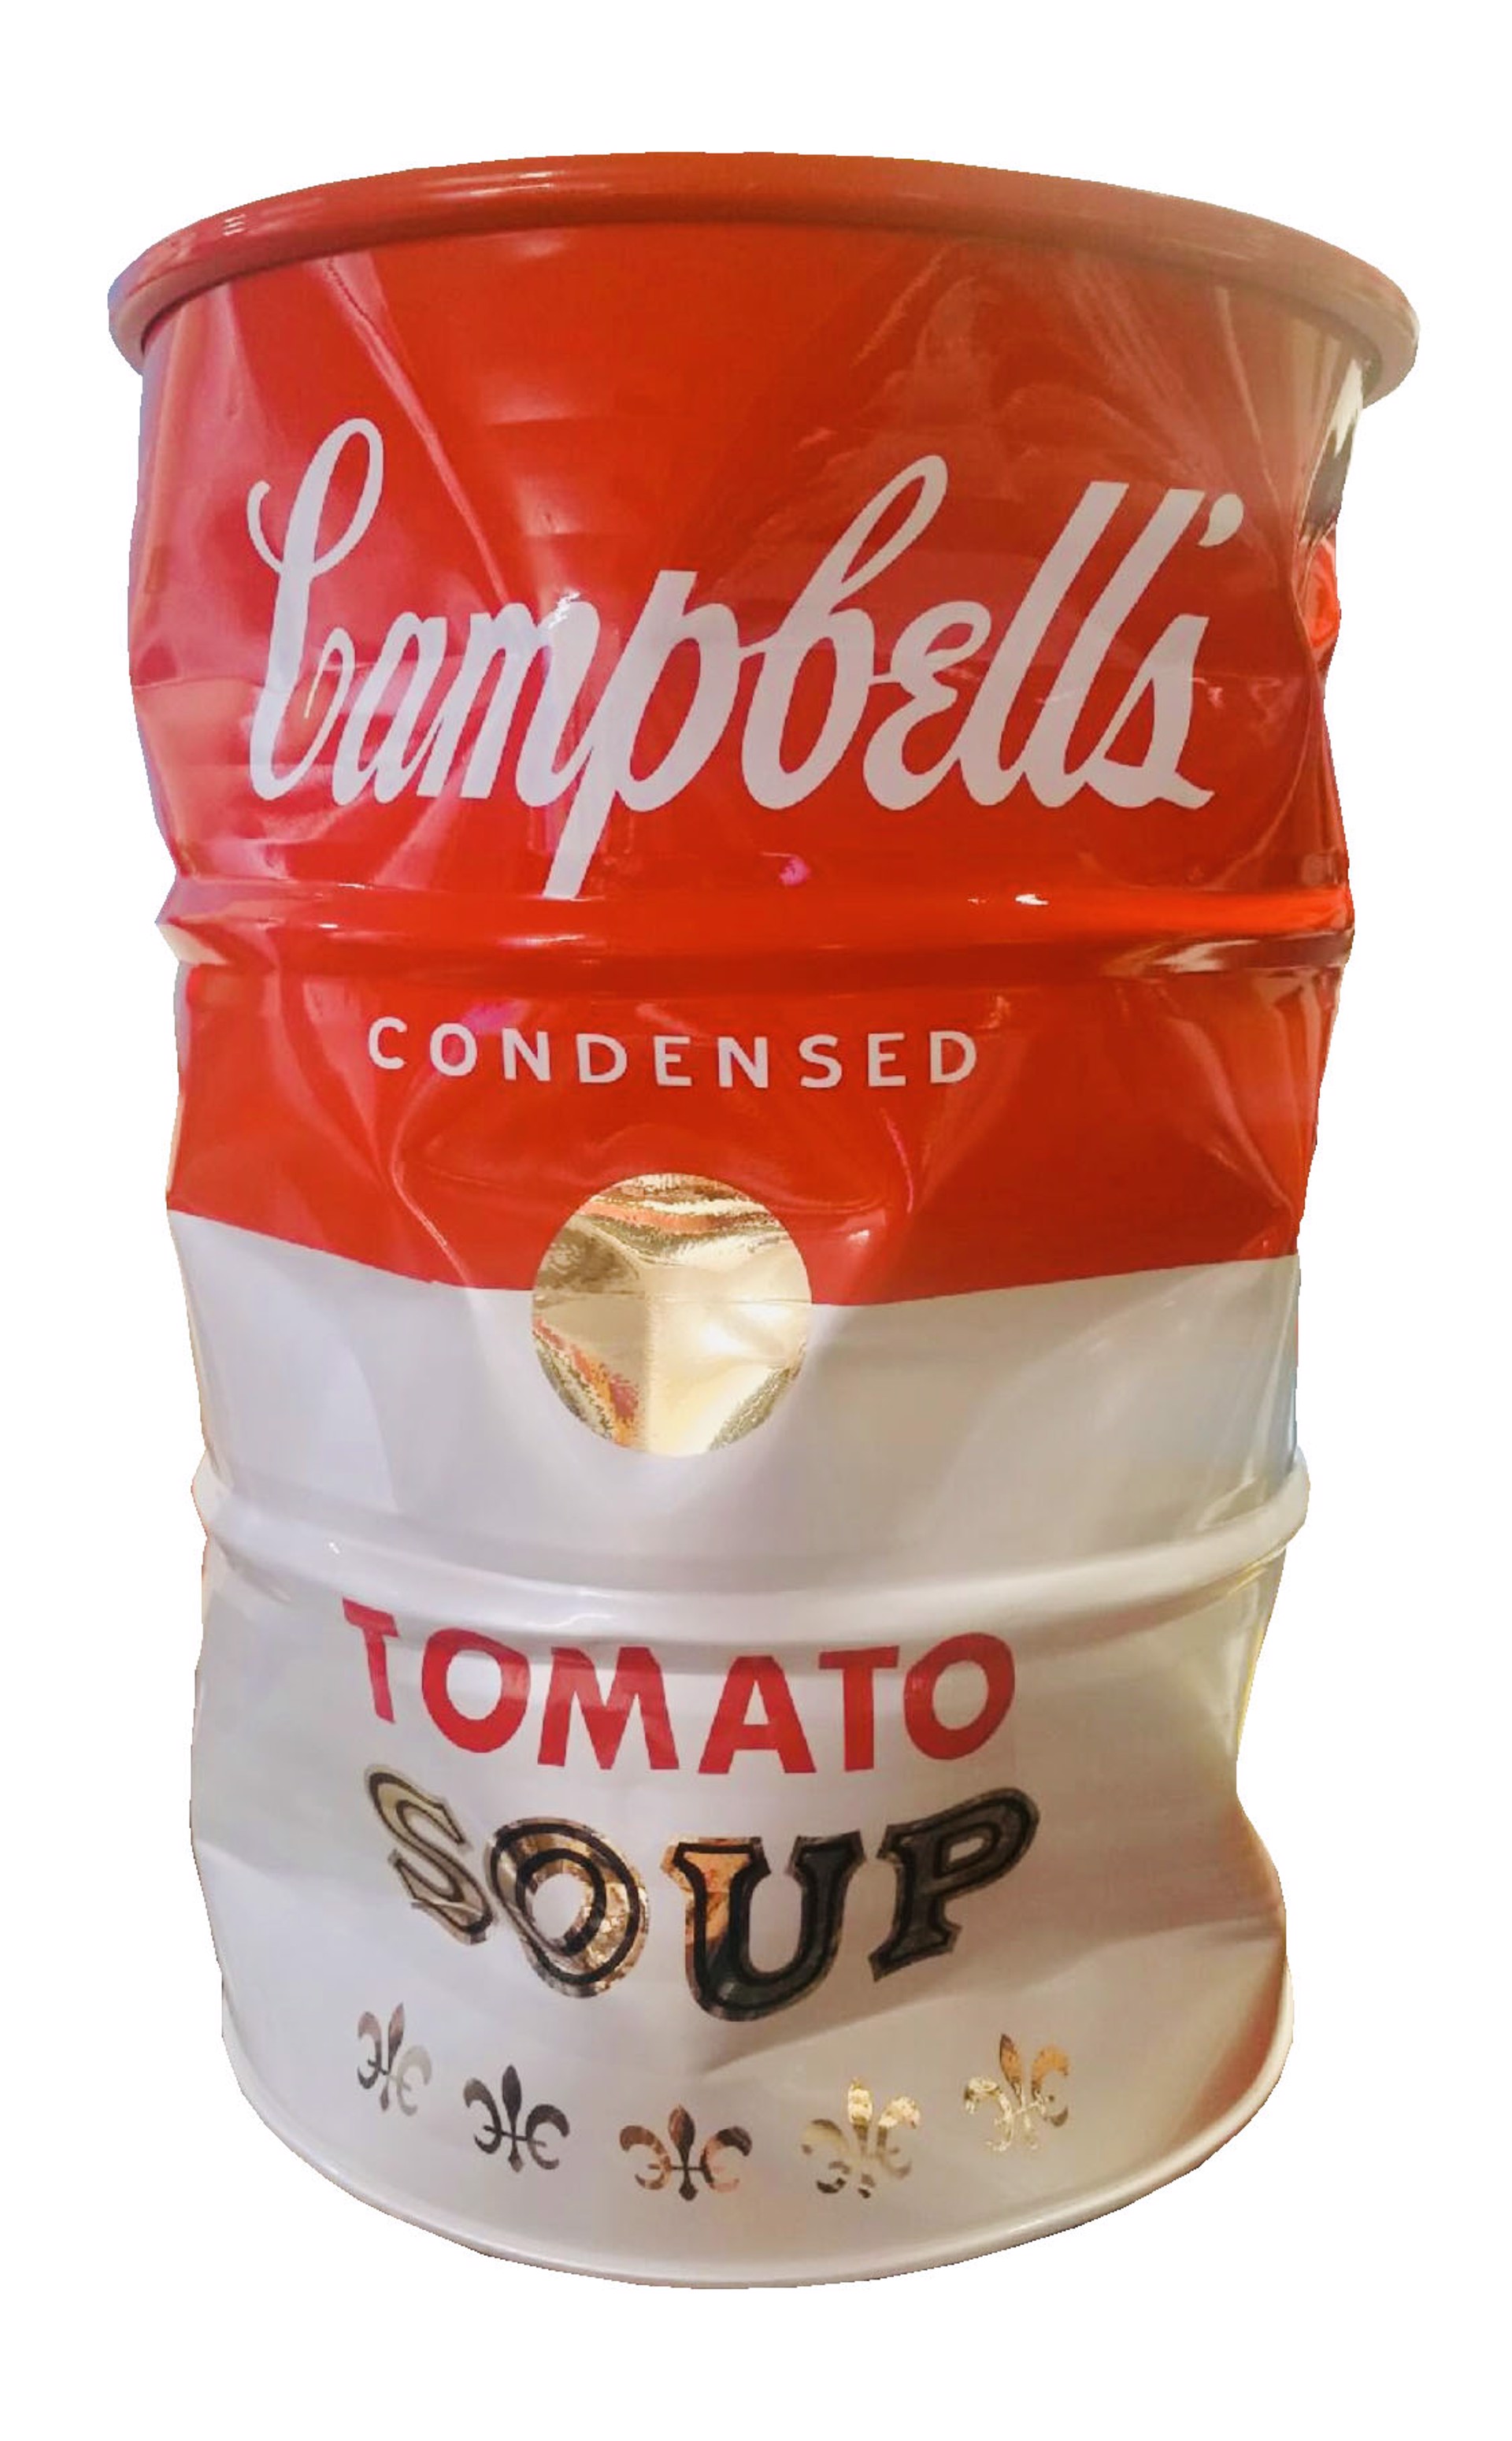 Campbell's Condensed - Tomato Soup Barrel by Efi Mashiah